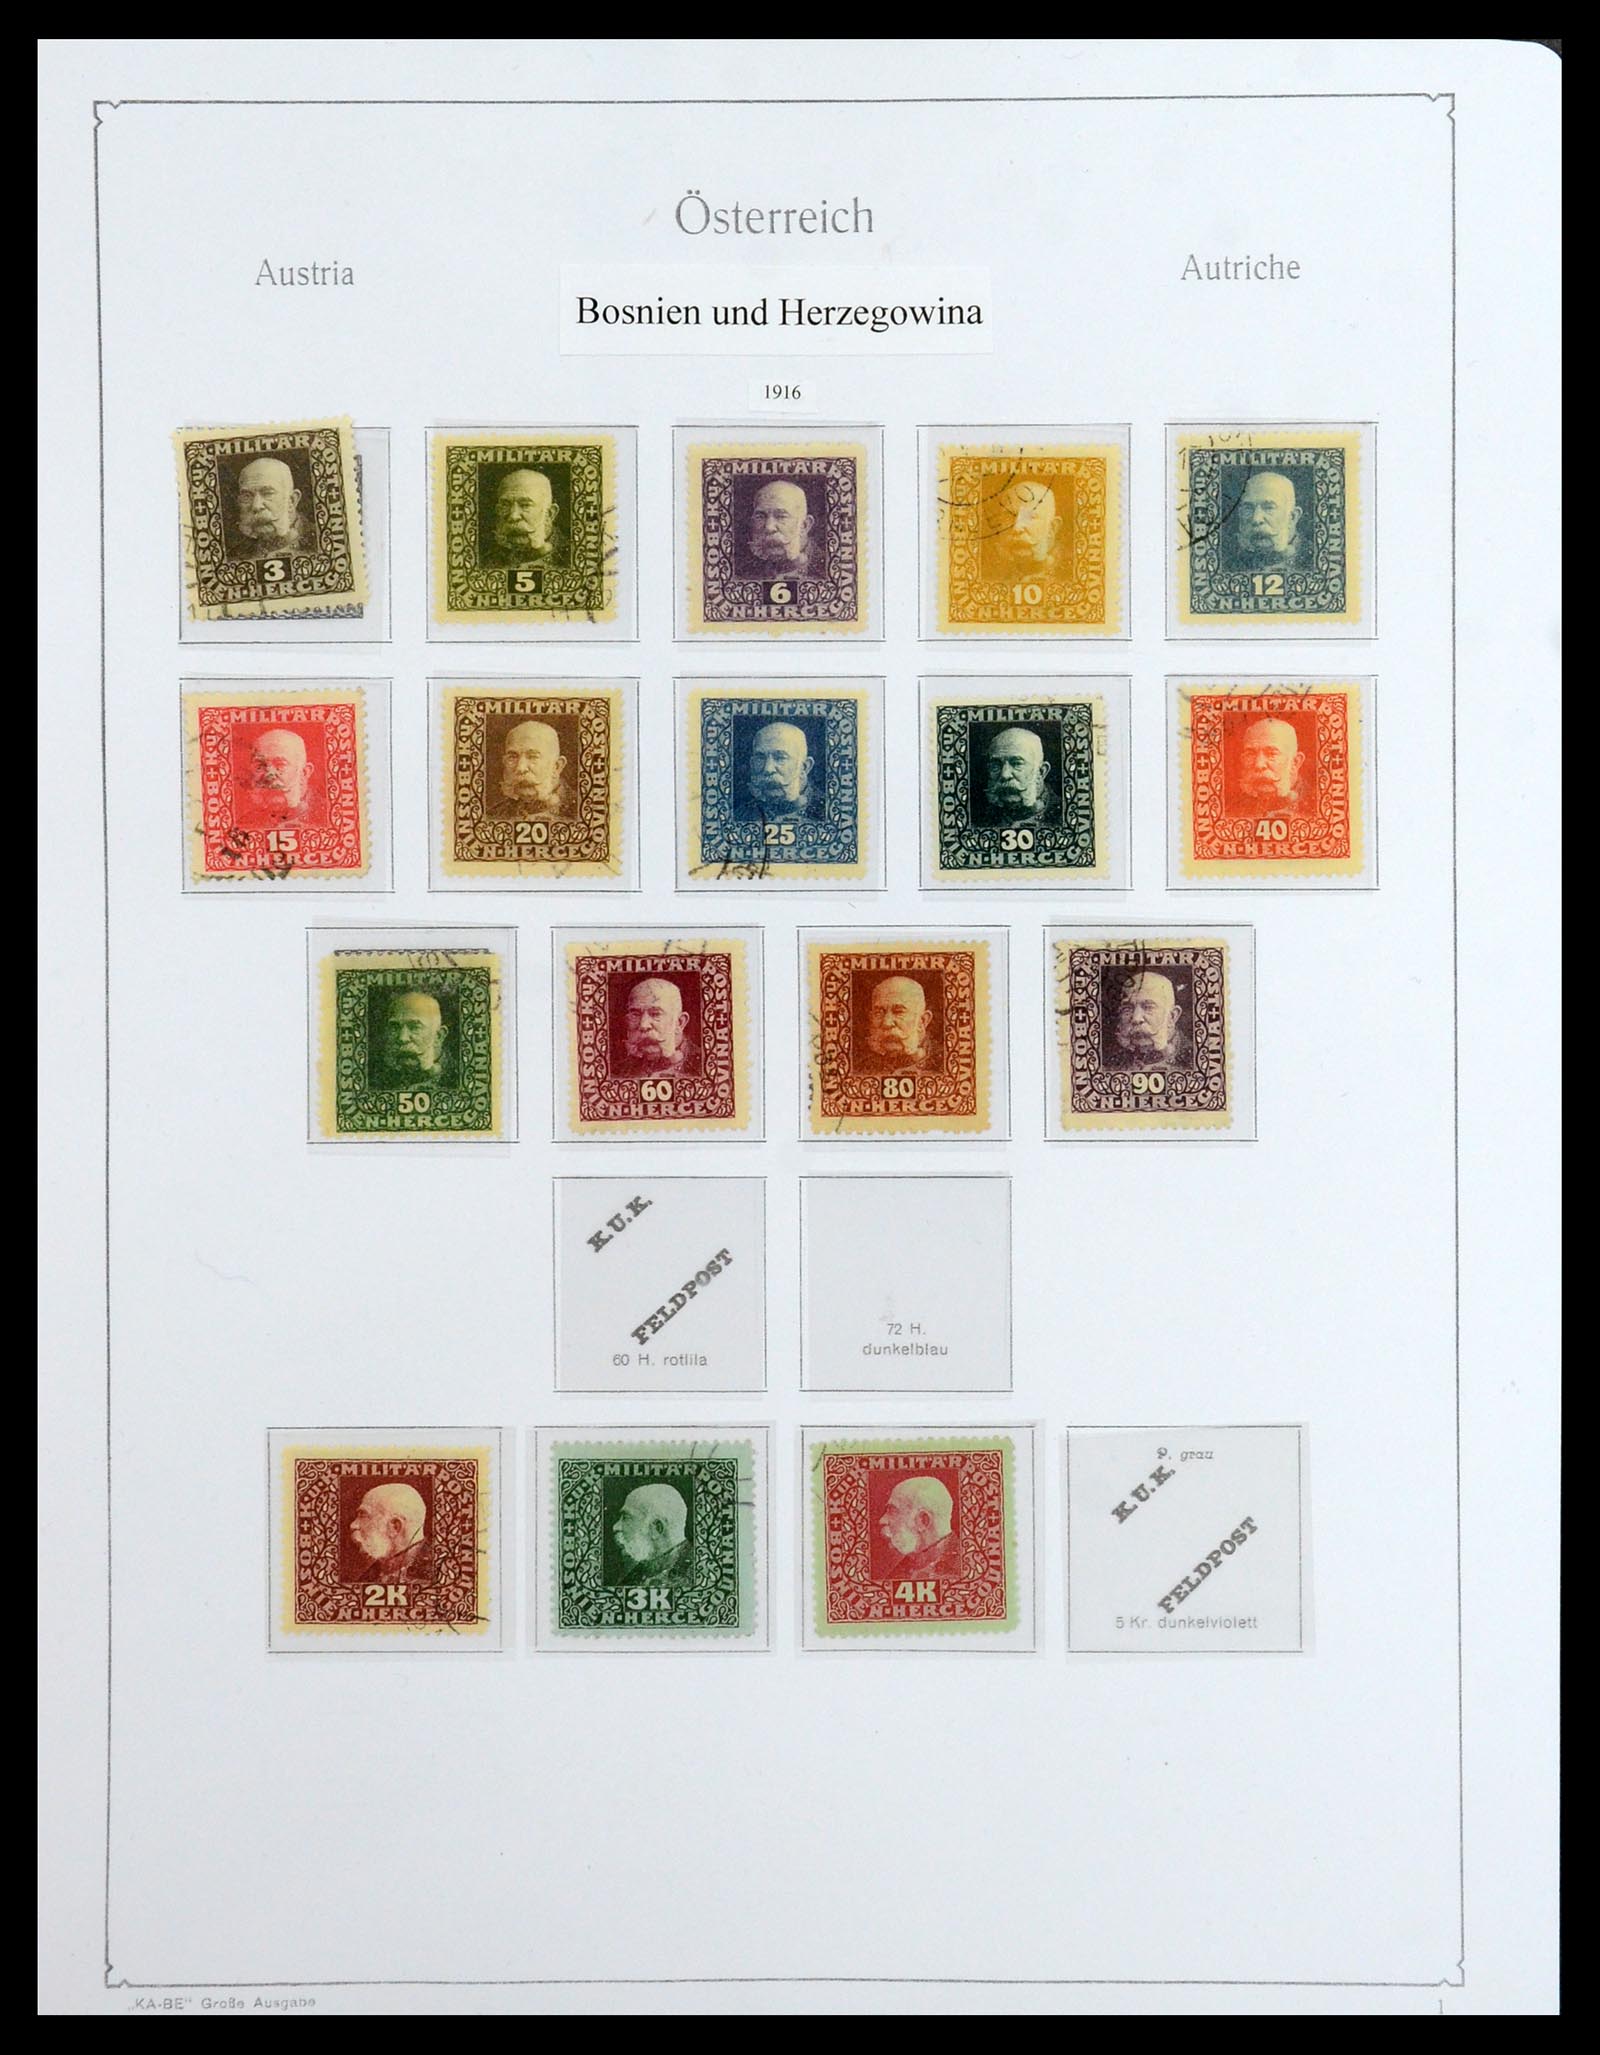 36364 015 - Stamp collection 36364 Austrian territories 1879-1918.